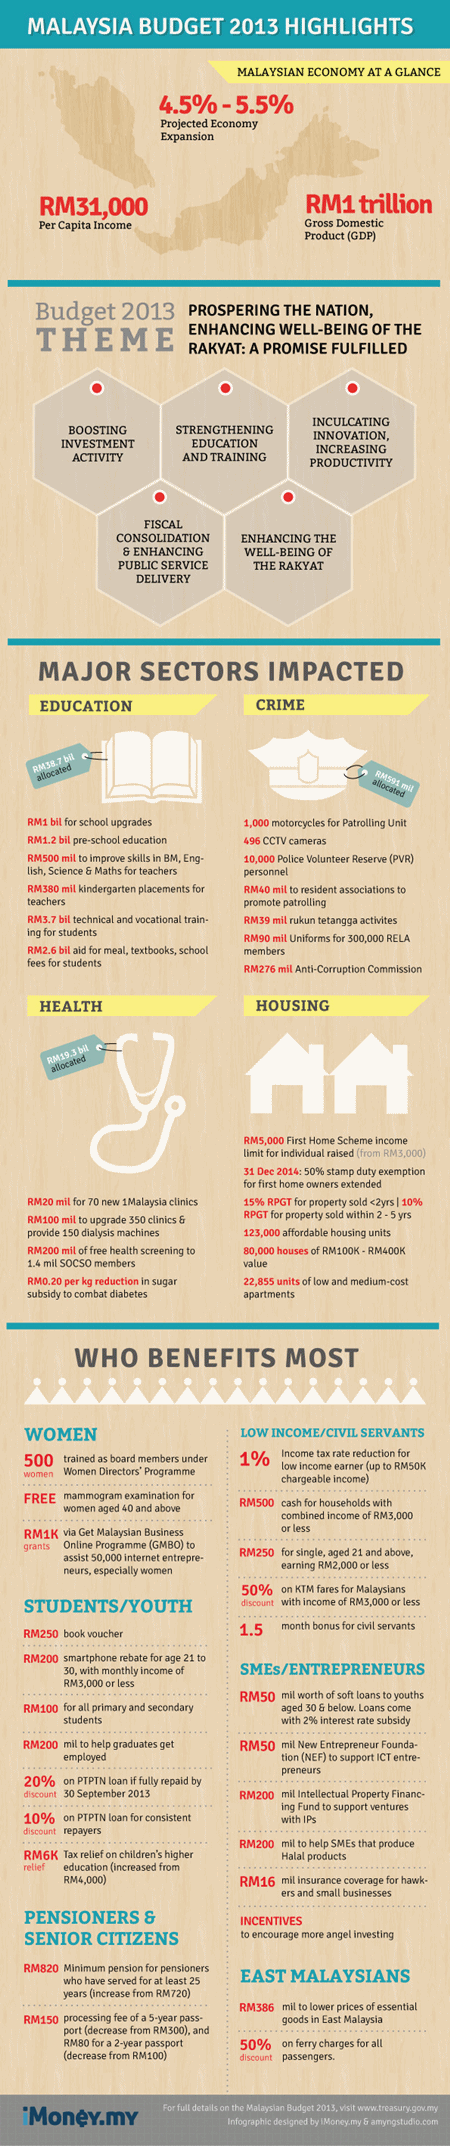 Malaysia Budget 2013 Infographic by iMoney gif